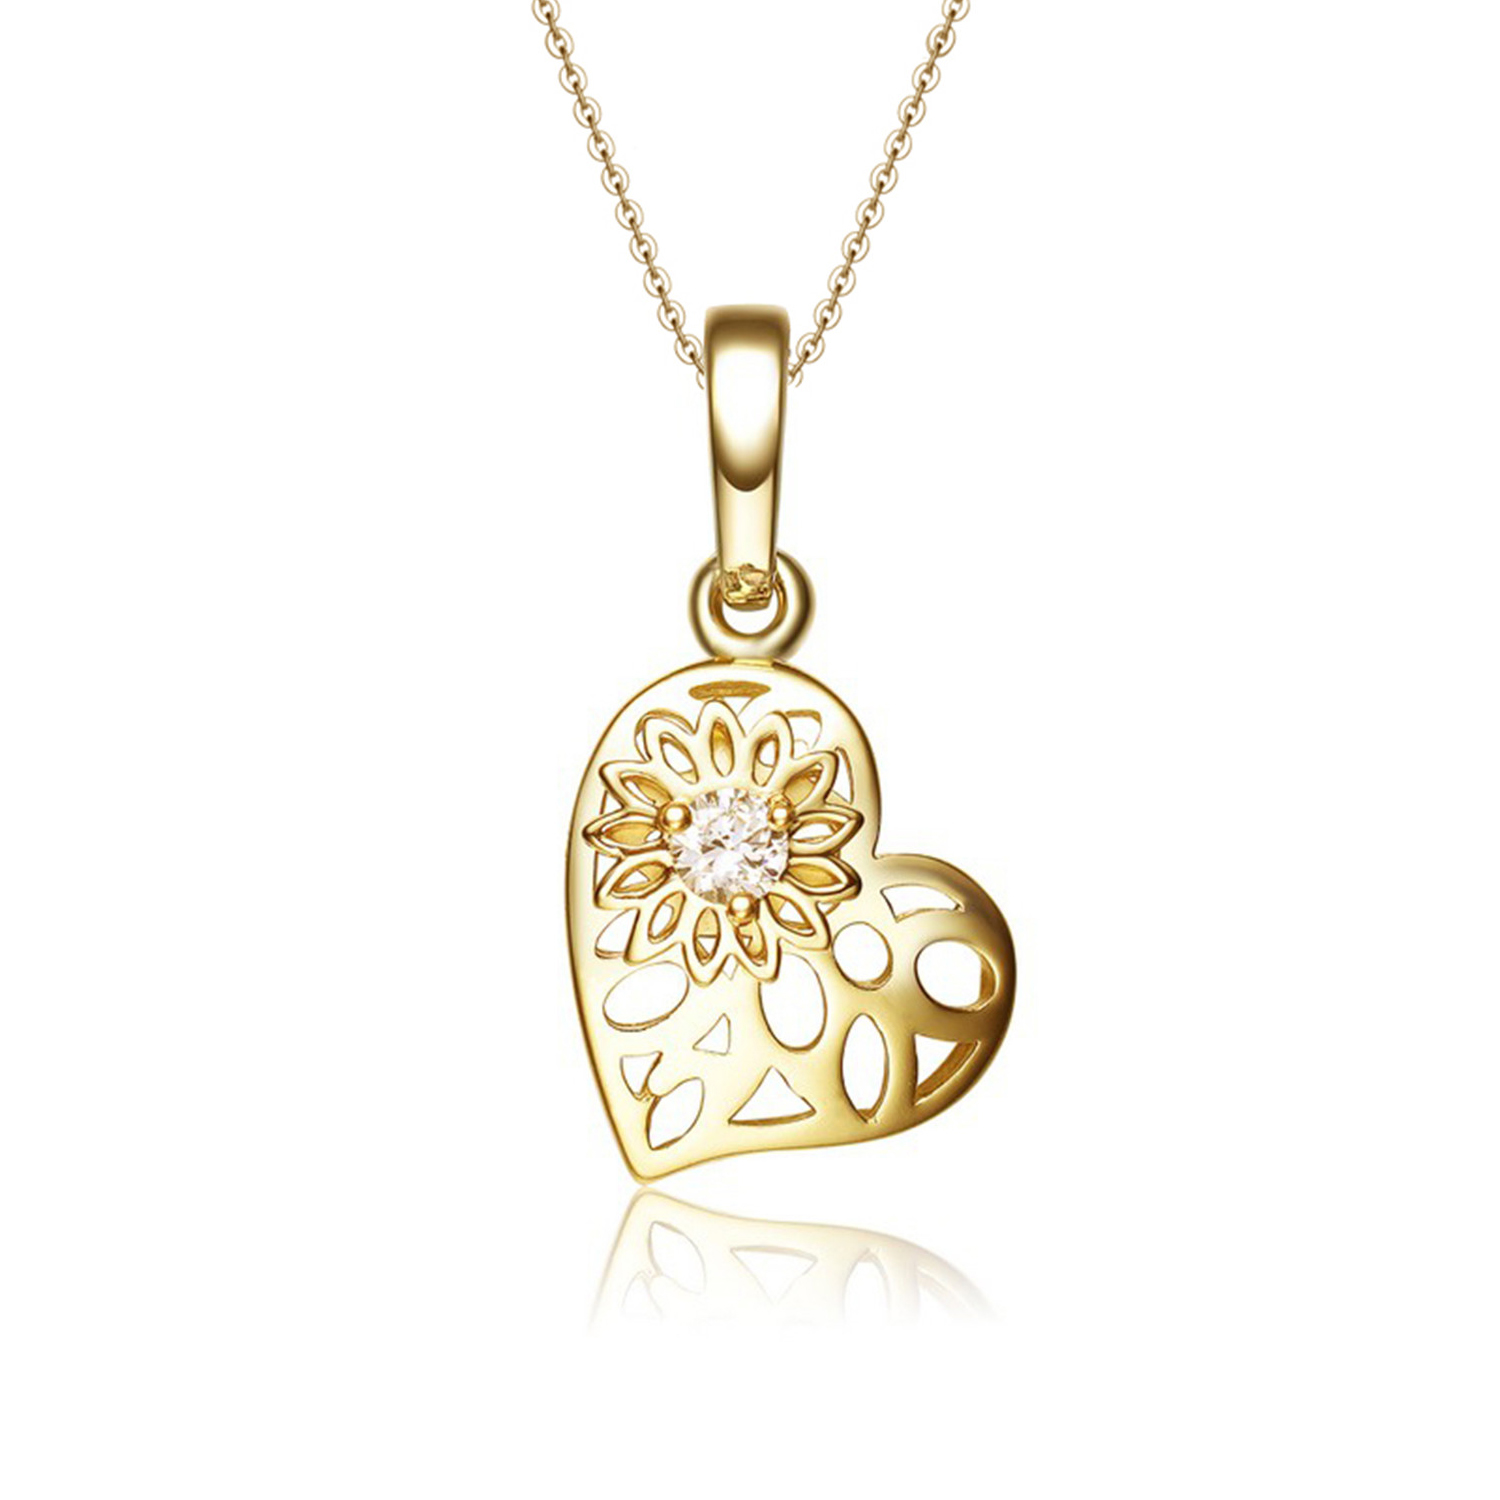 Elegant delicate women style 925 sterling silver 18K Gold Plated cubic zirconia love heart pendant (图3)